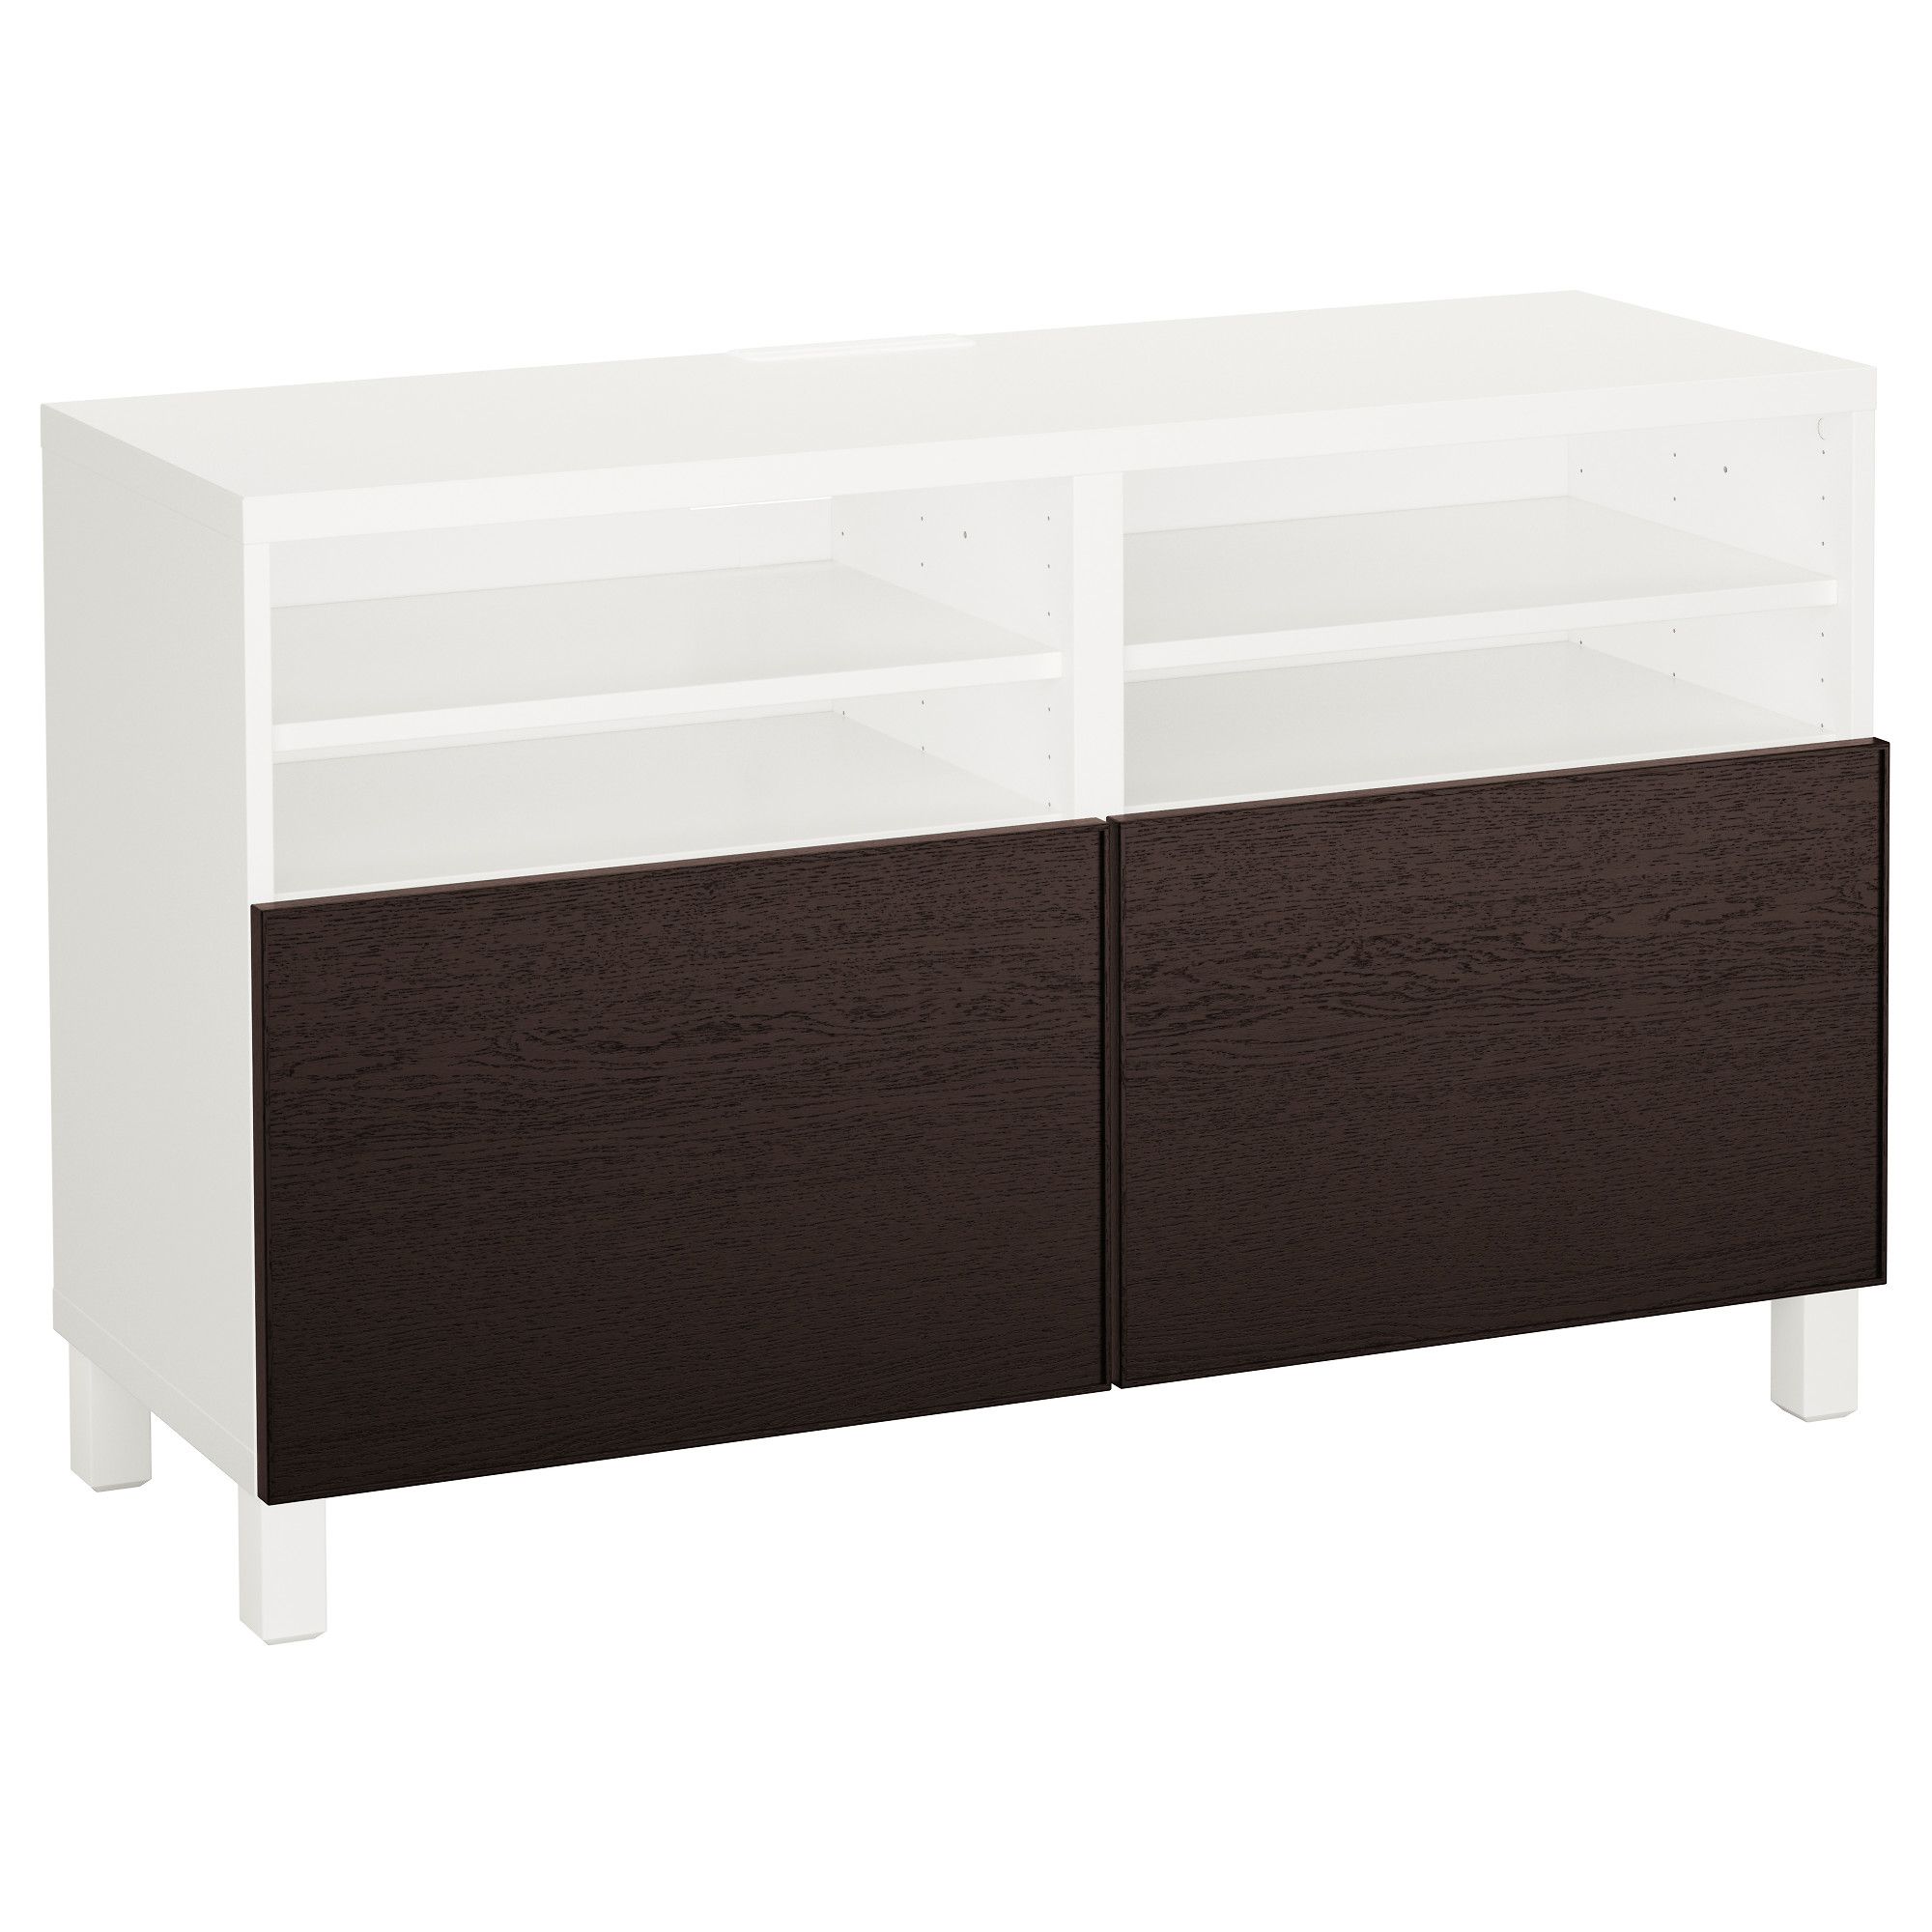 Ikea Lithuania – Shop For Furniture, Lighting, Home Accessories & More With Regard To Most Recent 4 Door Wood Squares Sideboards (View 4 of 20)